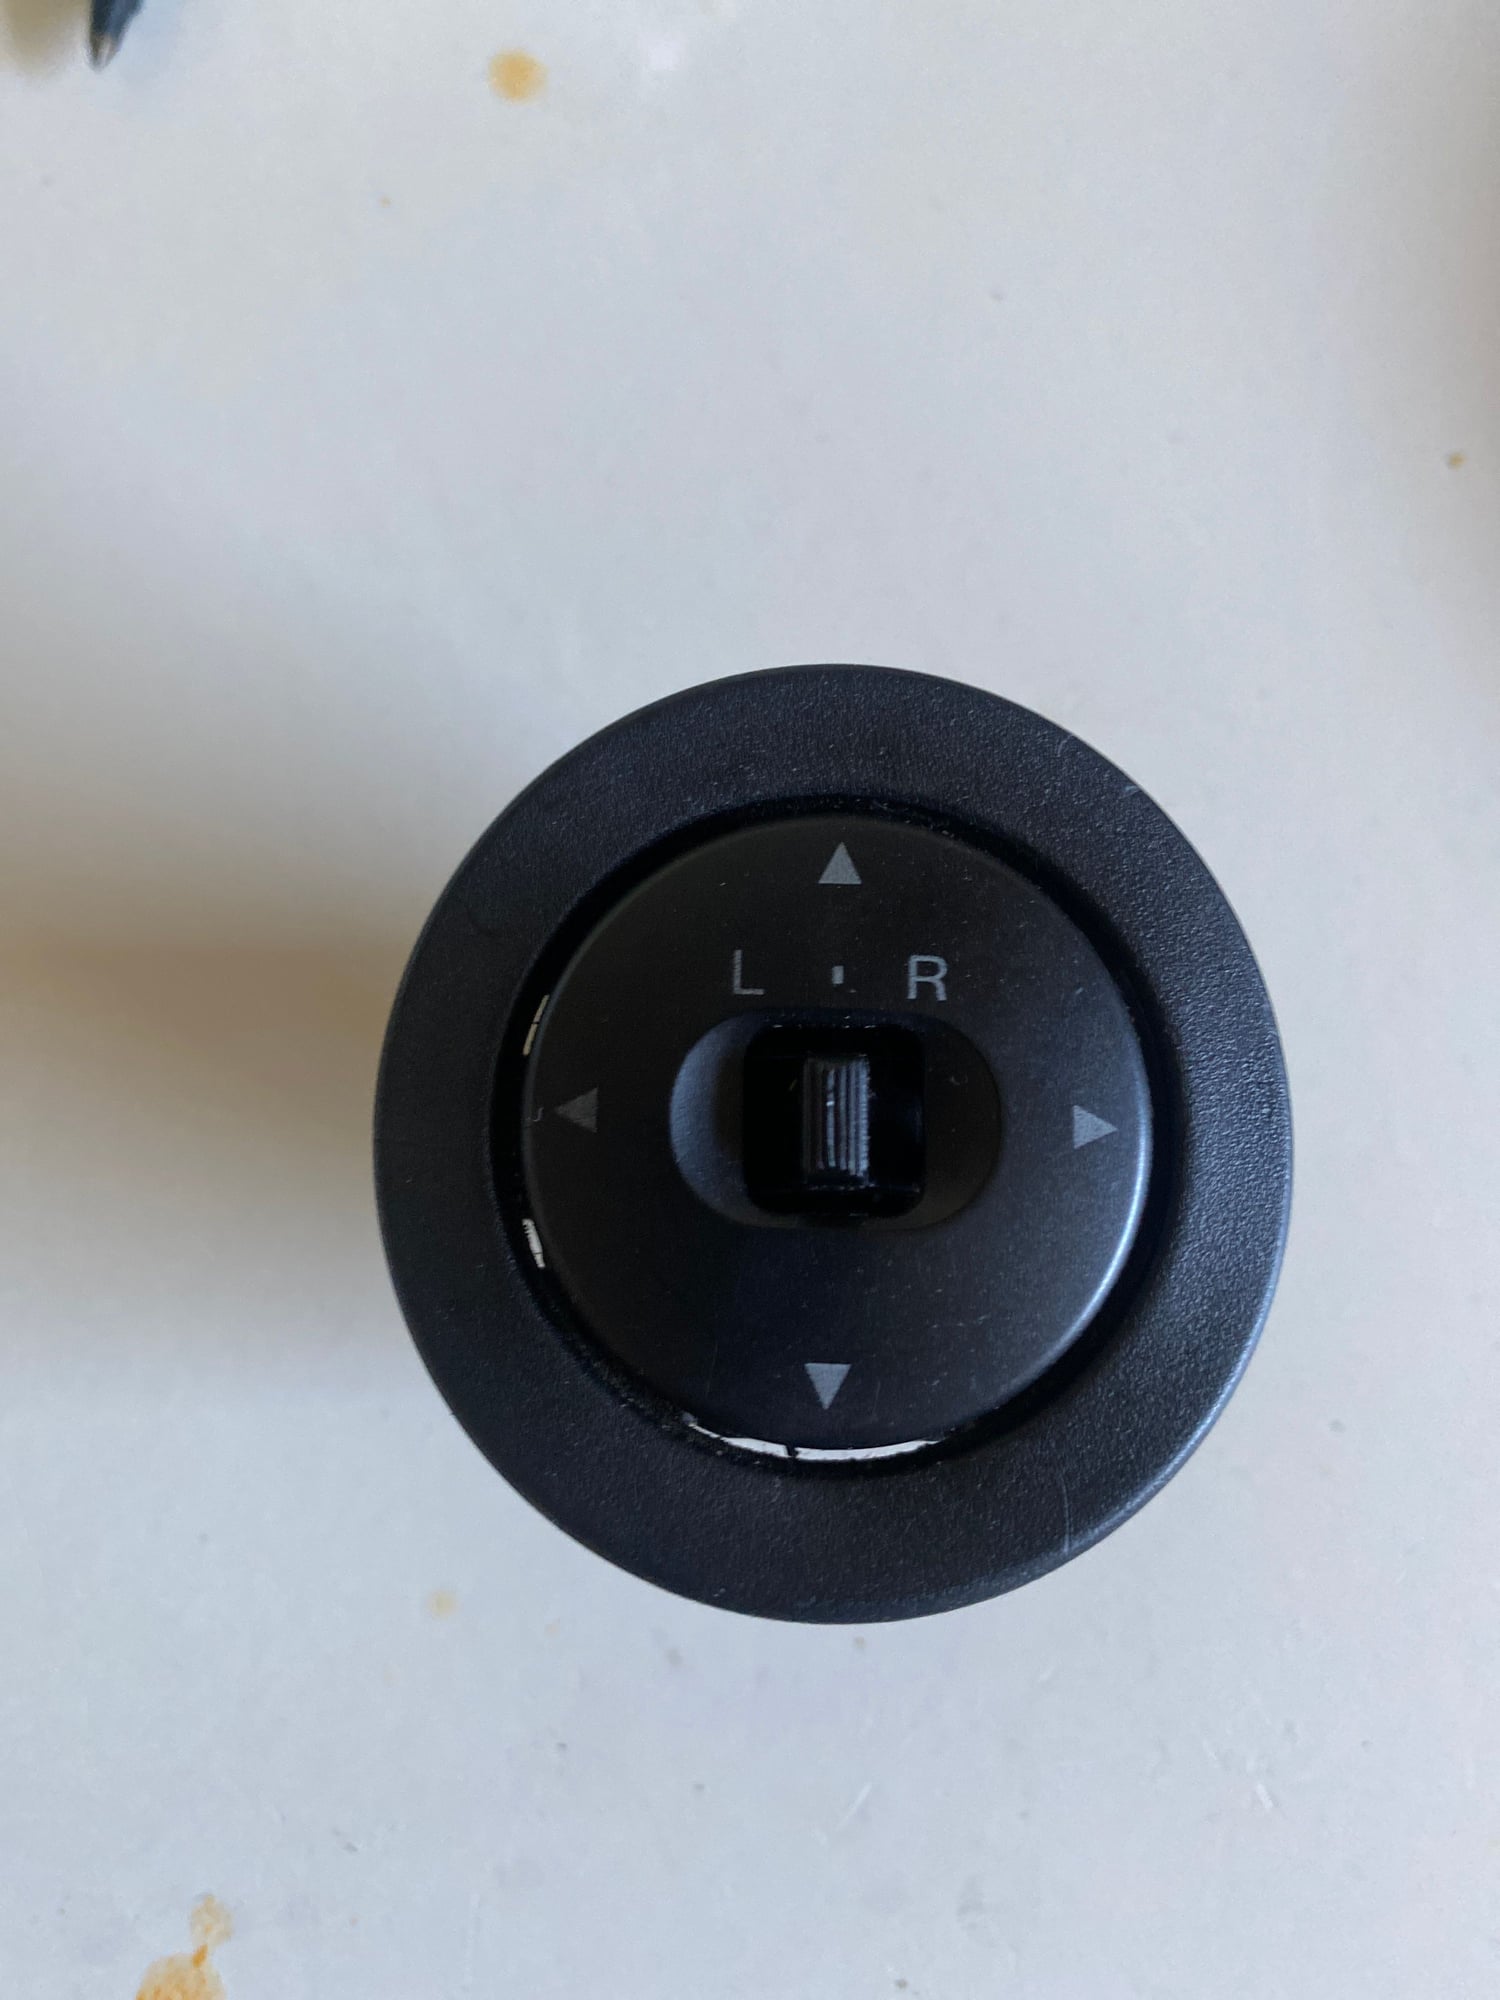 Interior/Upholstery - Fd rx7 lhd mirror switch - Used - 1993 to 1995 Mazda RX-7 - Miami, FL 33173, United States